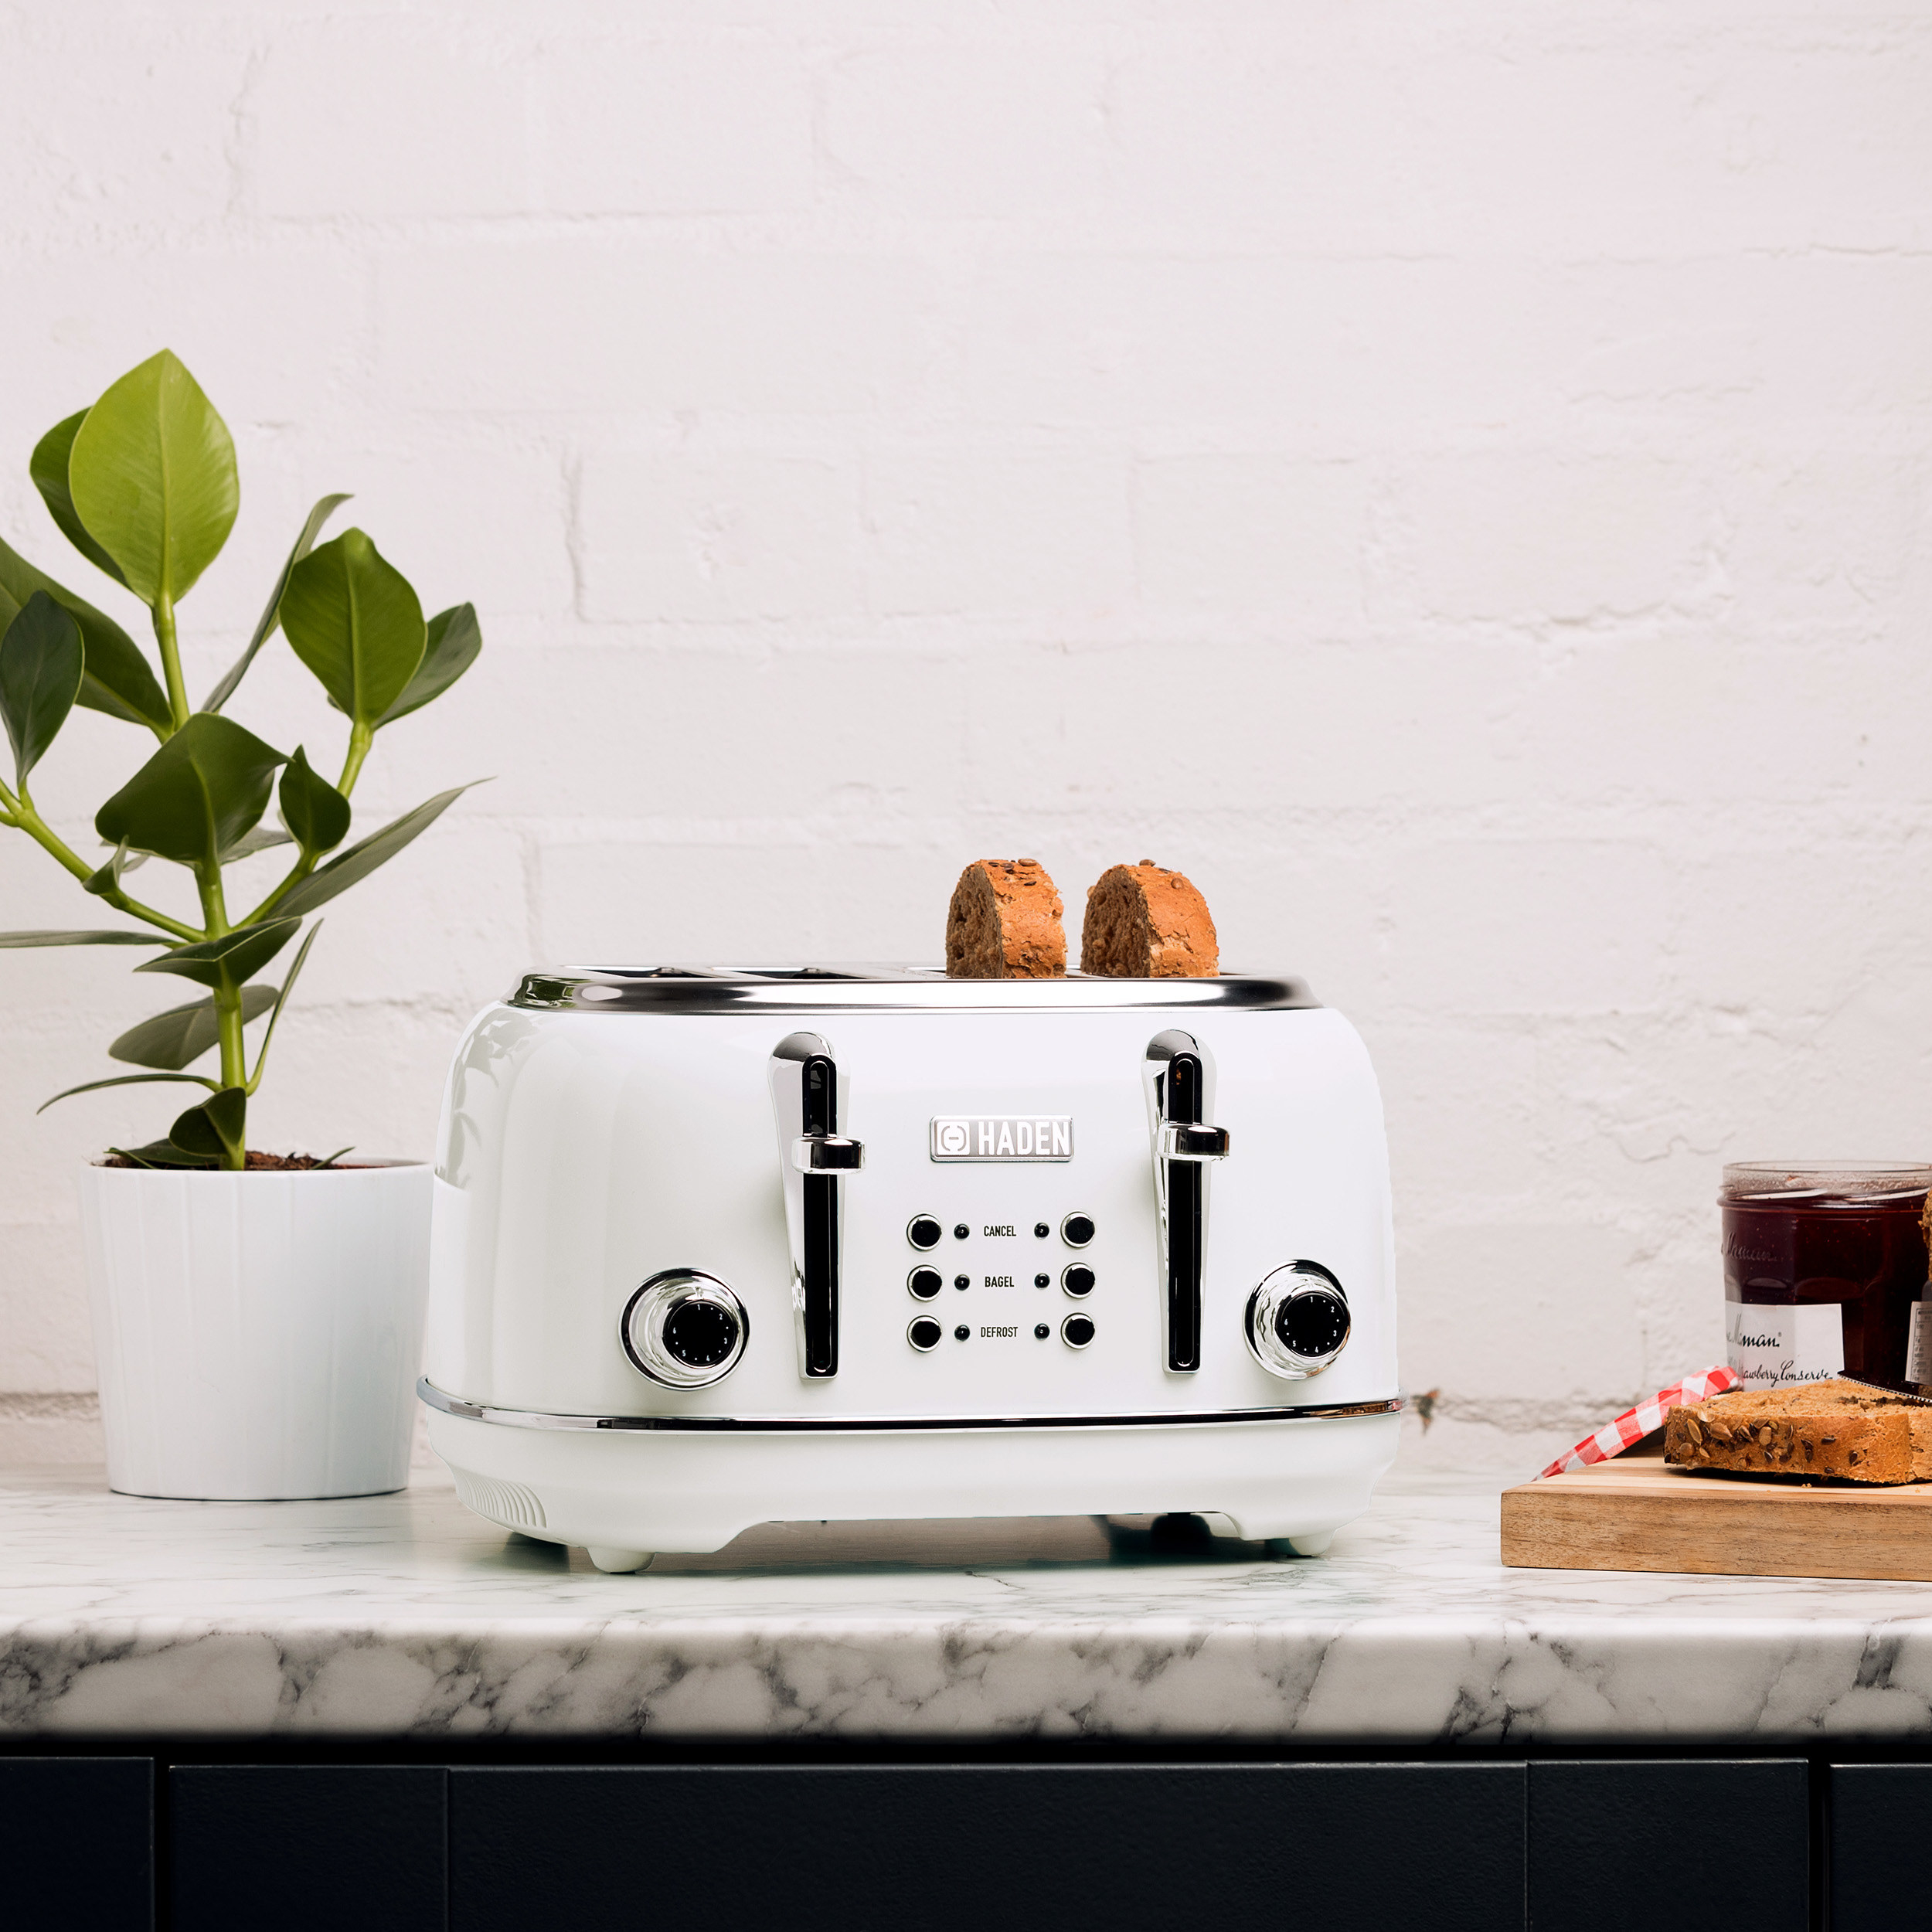 The toaster in white, featuring a retro design